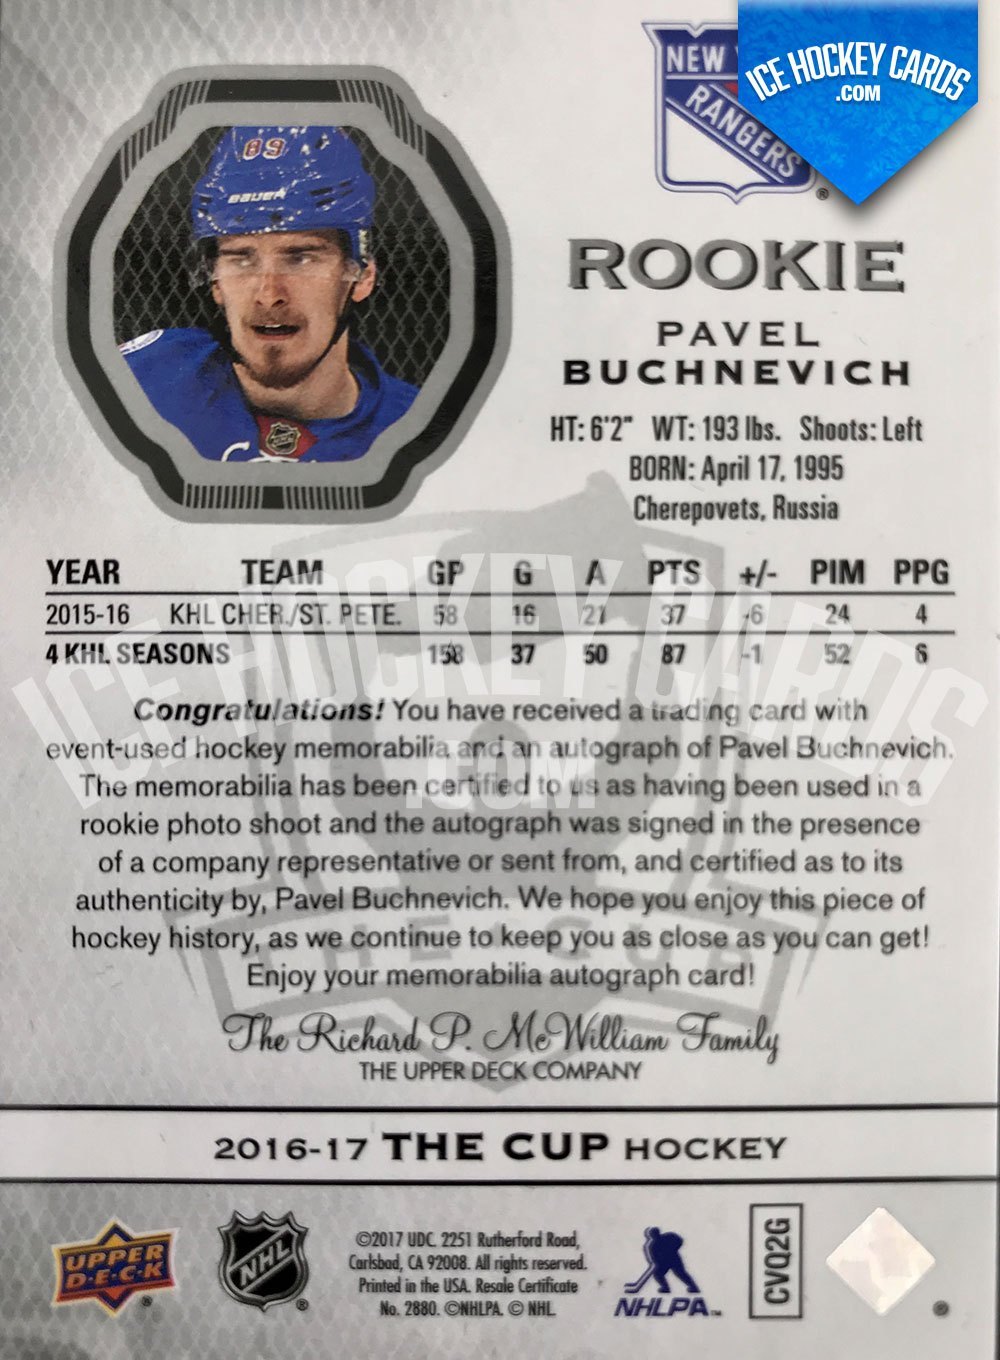 Upper Deck - The Cup 2016-17 - Pavel Buchnevich Rookie Auto Patch RC back